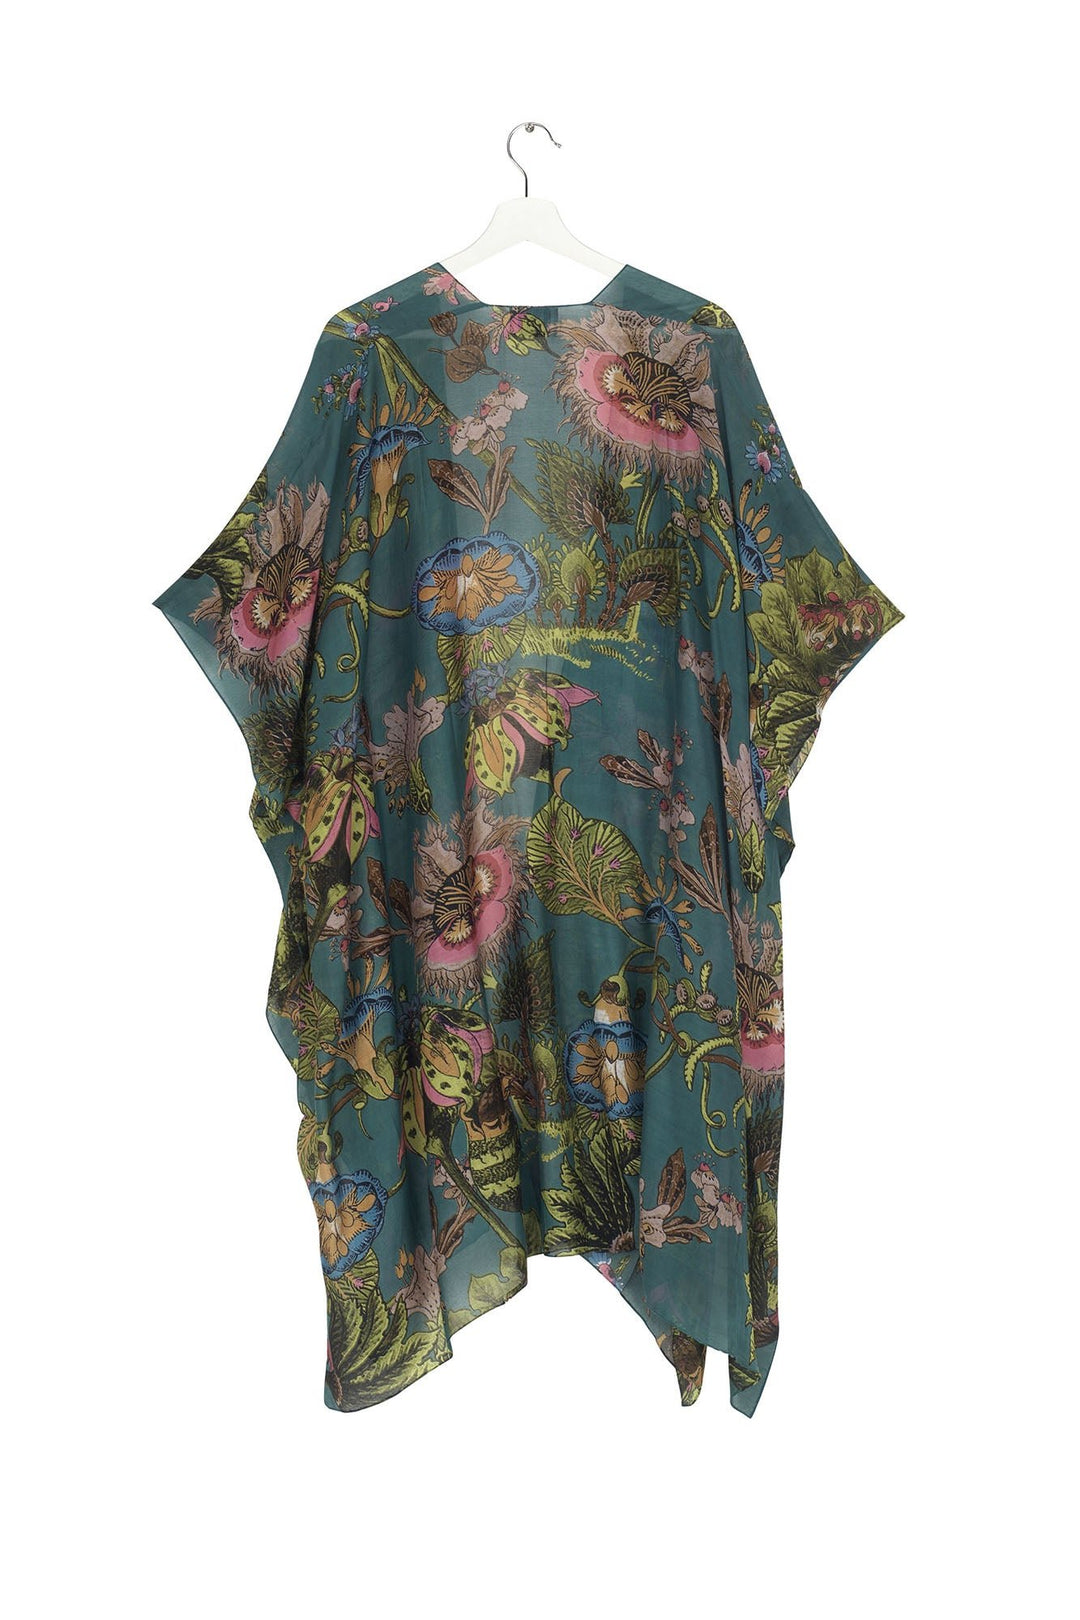 Eccentric Blooms Teal Throwover - One Hundred Stars